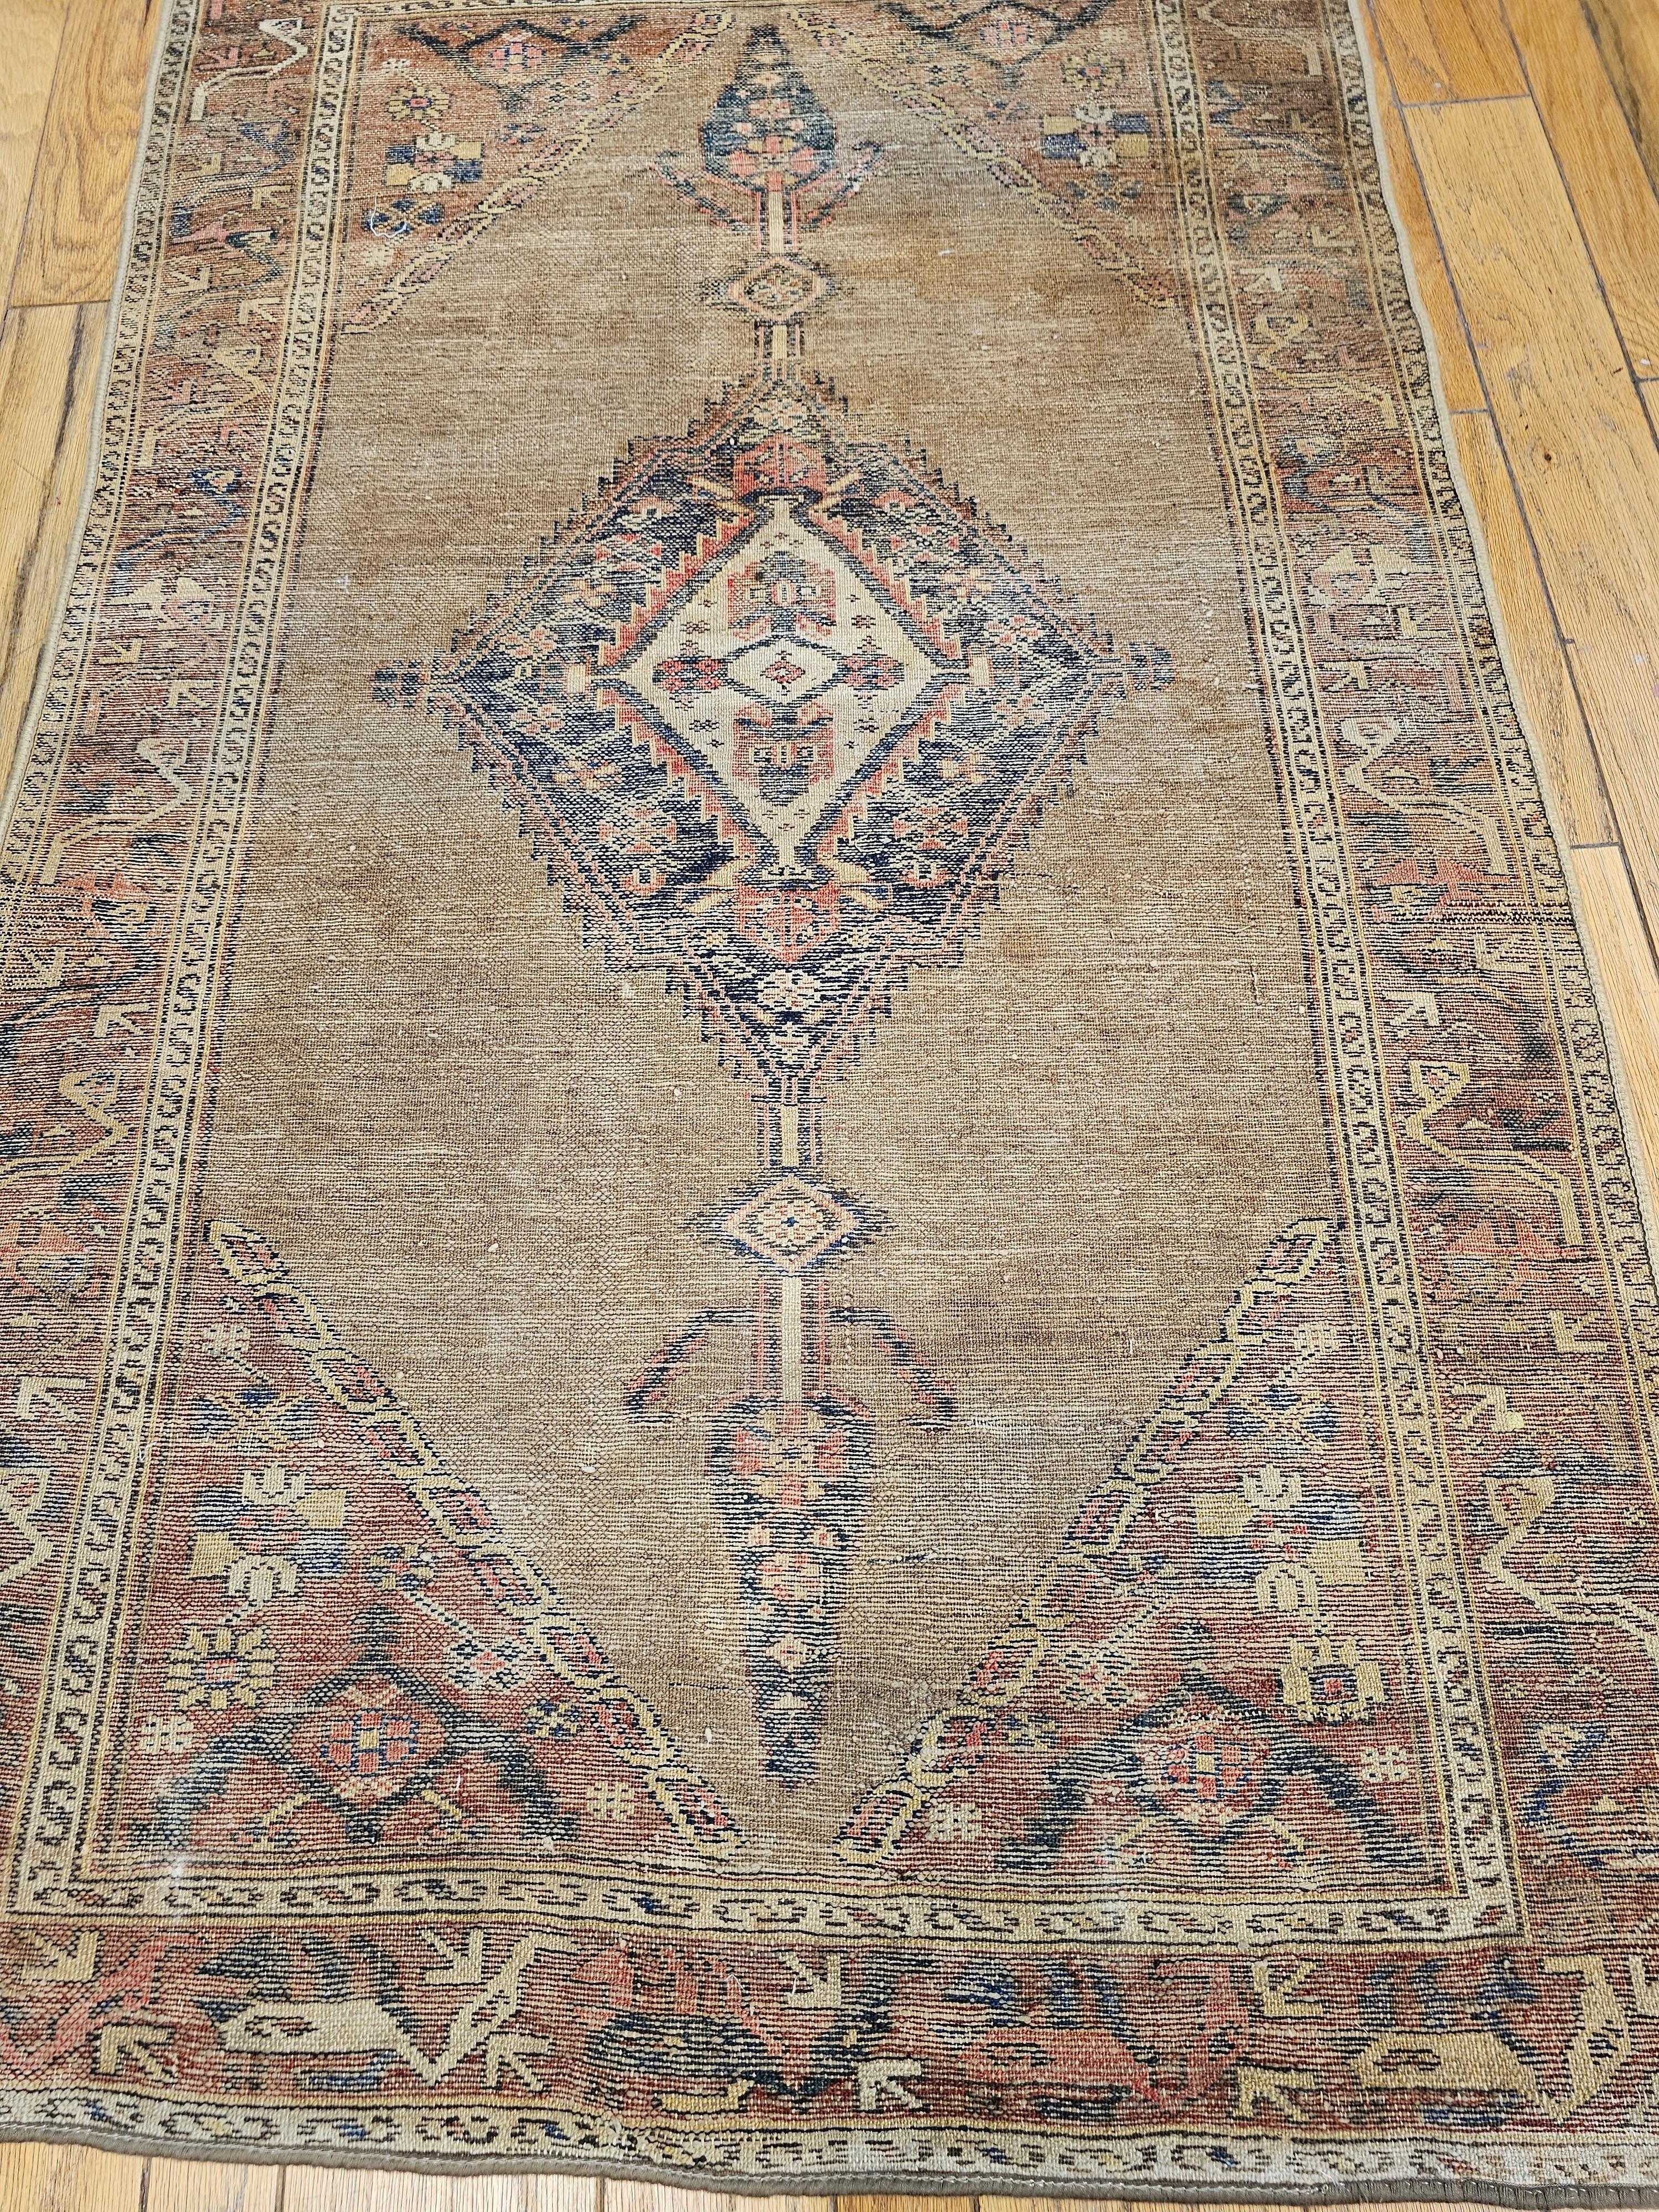 Vintage Persian Camelhair Malayer Area Rug in Camel, Navy, Ivory, Rust Red, Blue For Sale 14